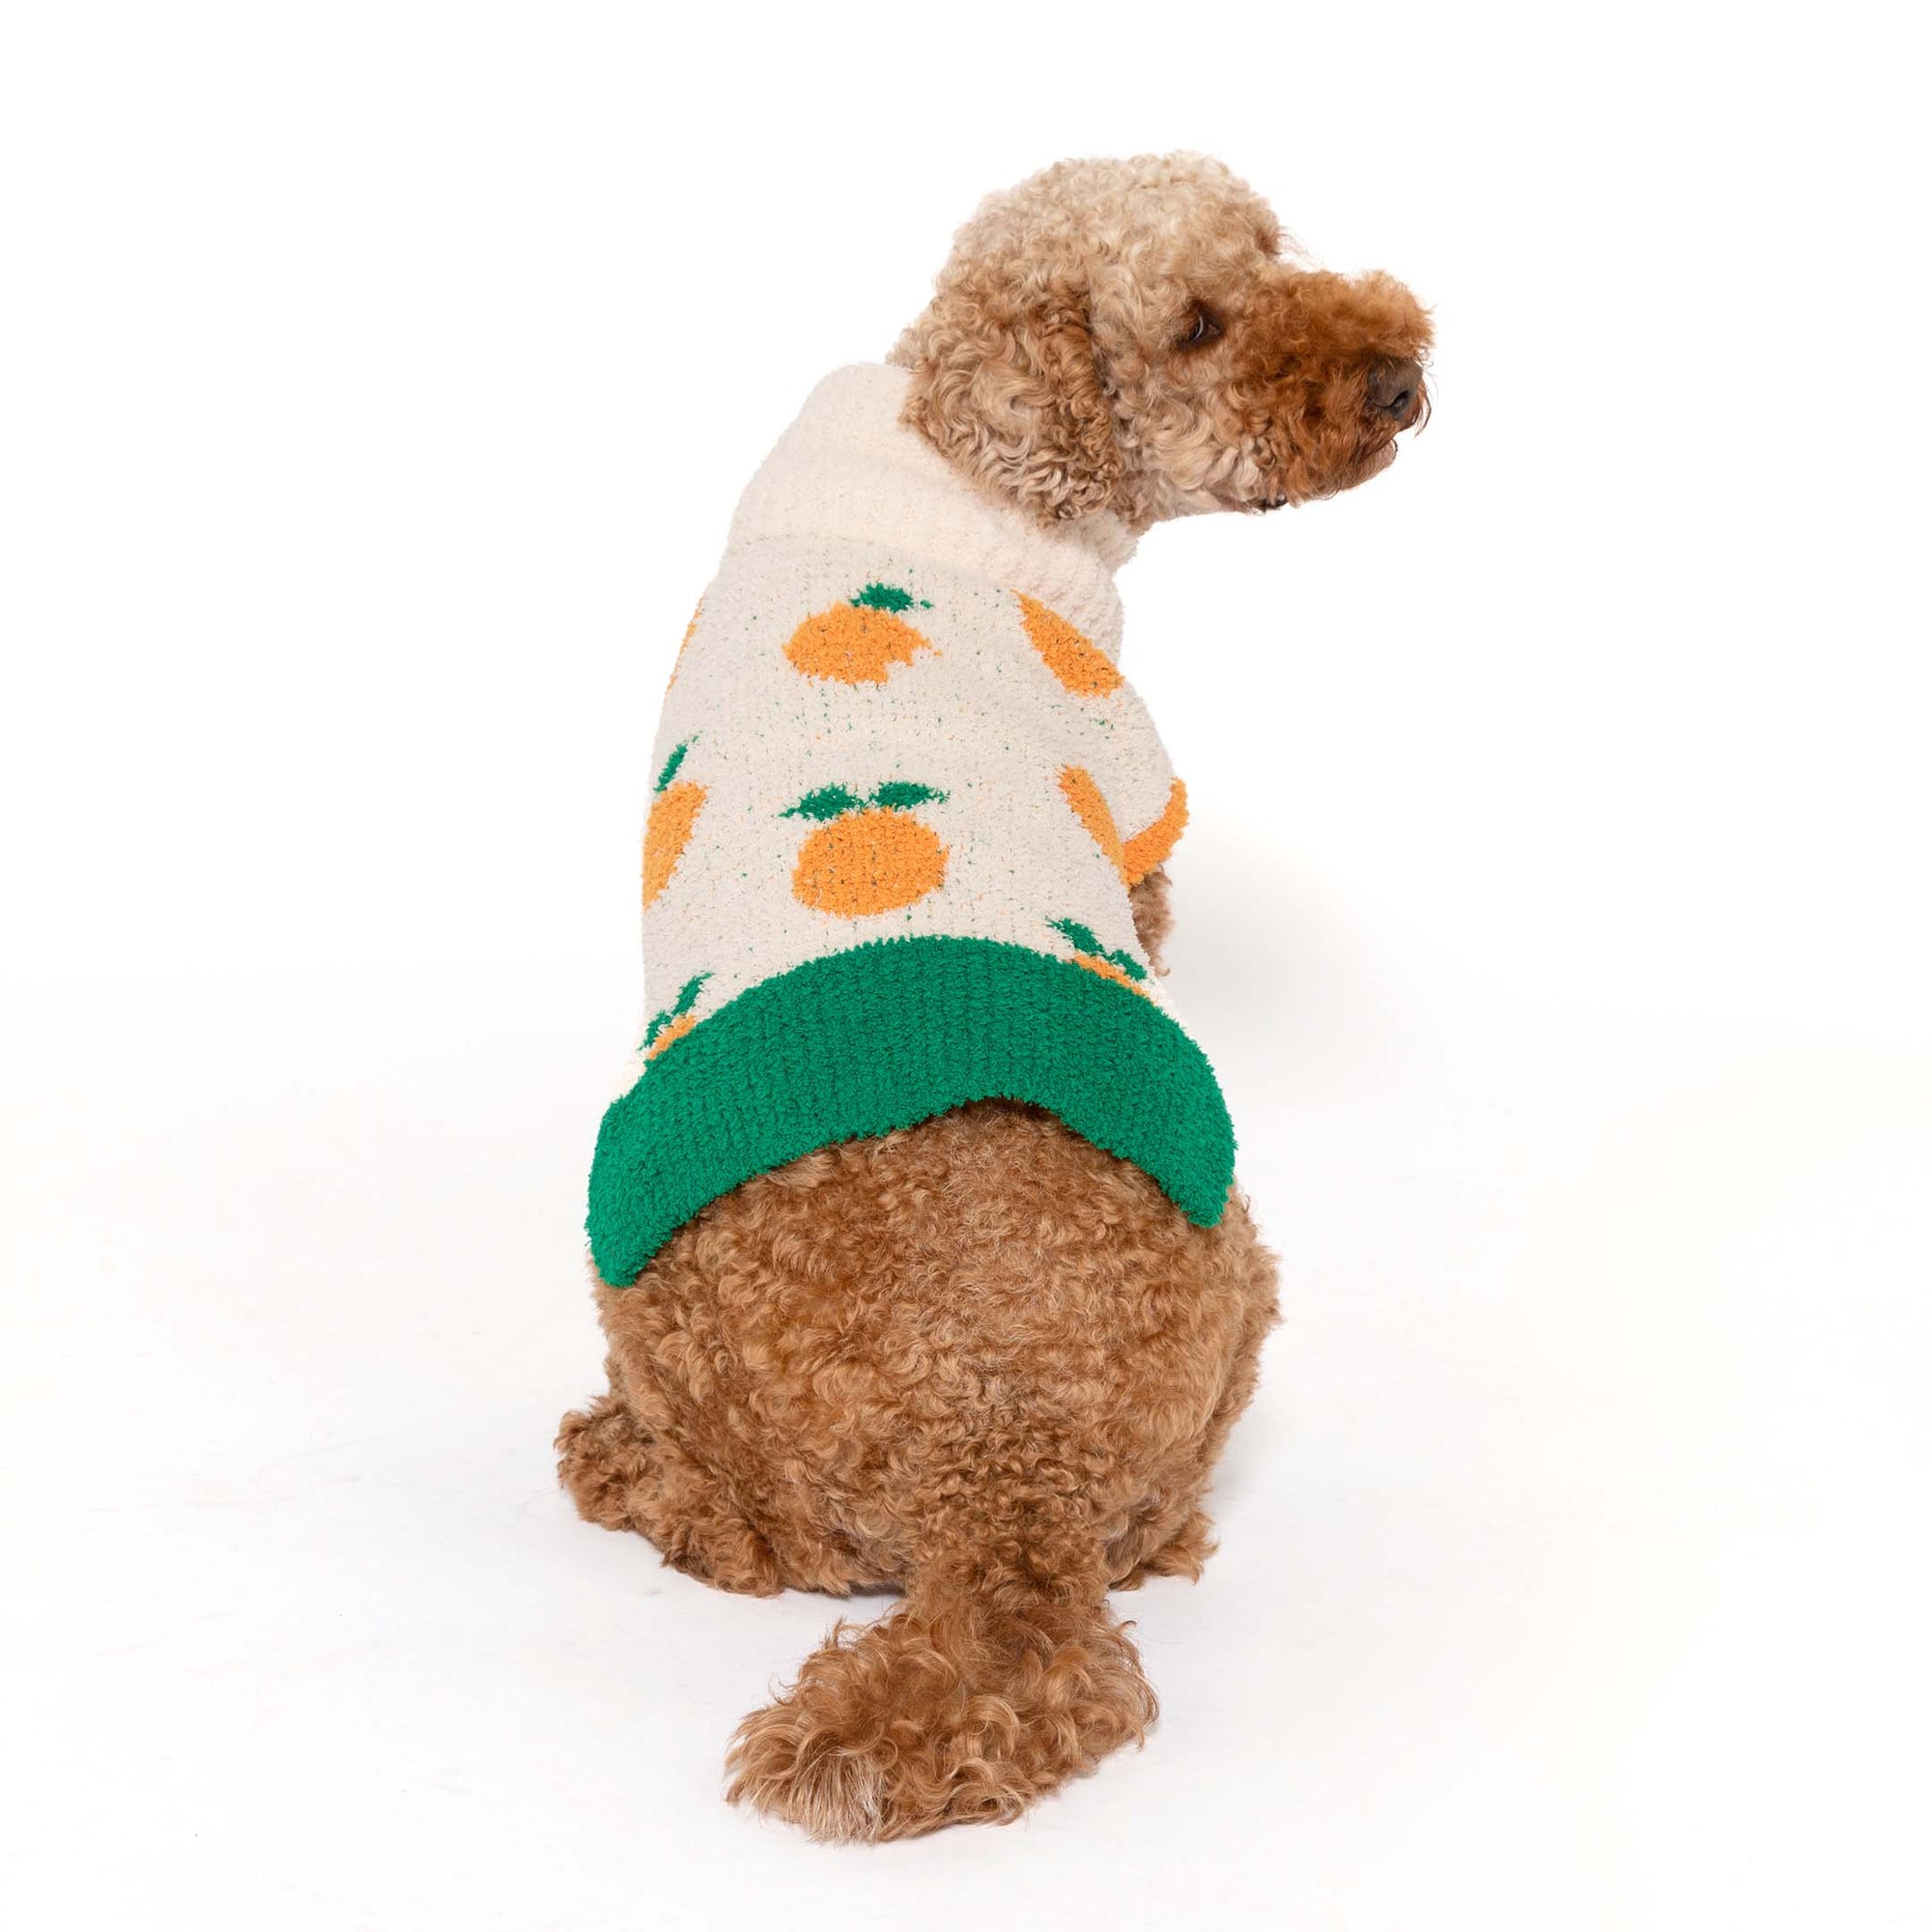 A small apricot poodle models "The Furryfolks" cream-colored sweater adorned with bright orange orange motifs and a bold green hem, reflecting a charming and vibrant pet apparel design.